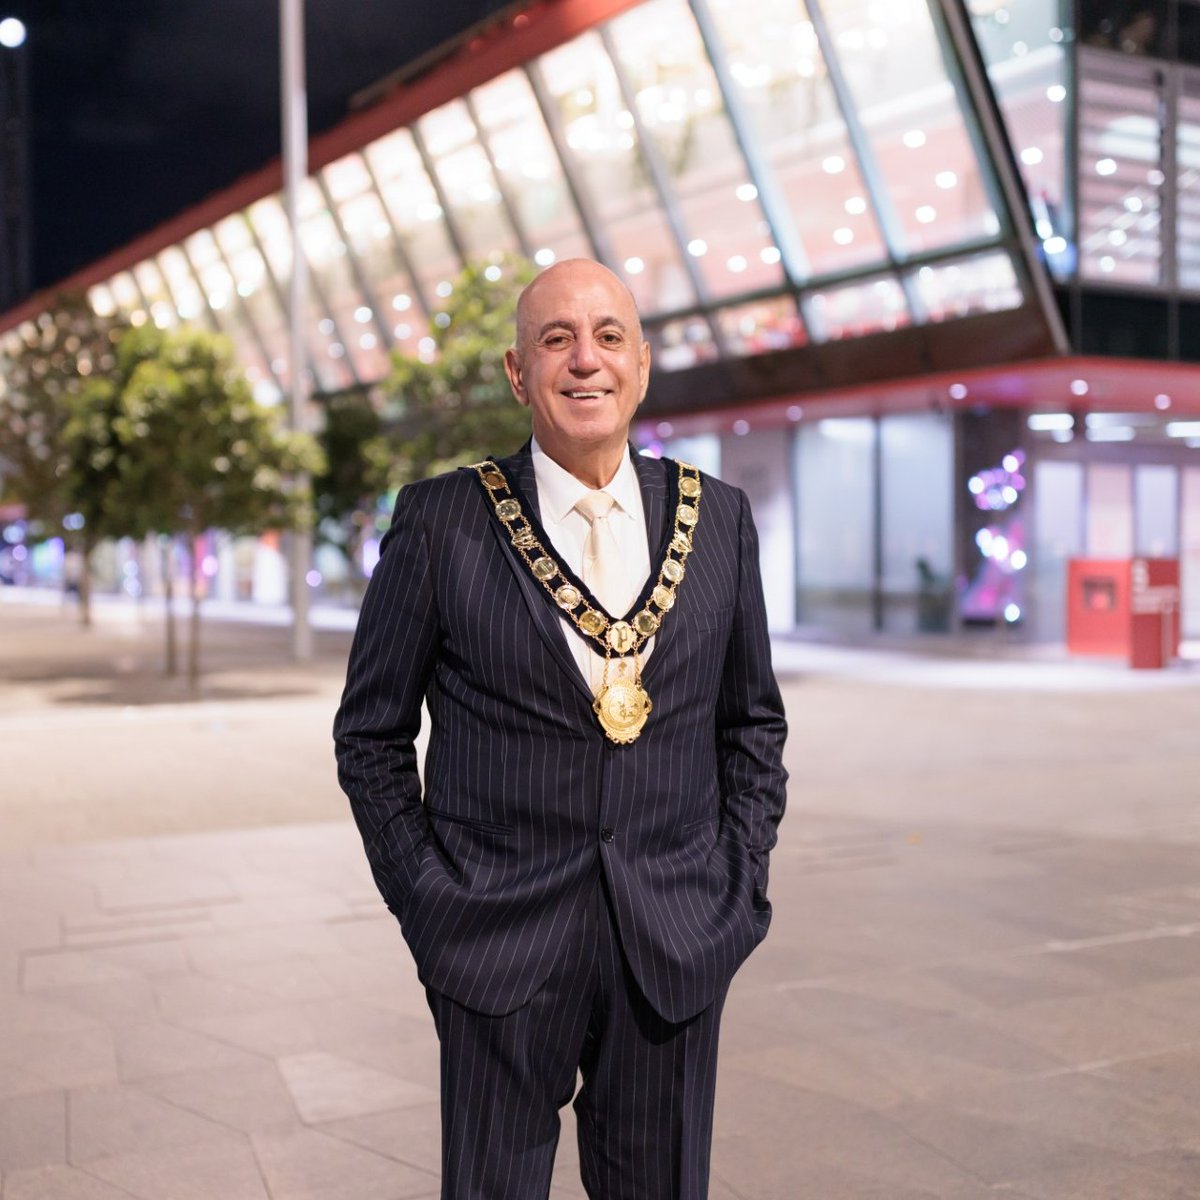 City of Parramatta Council tonight elected Councillor Pierre Esber as its new Lord Mayor. “I am proud to lead Council into this next formative period.” Cr Esber said. Read more here - cityofparramatta.co/3LAIOPs